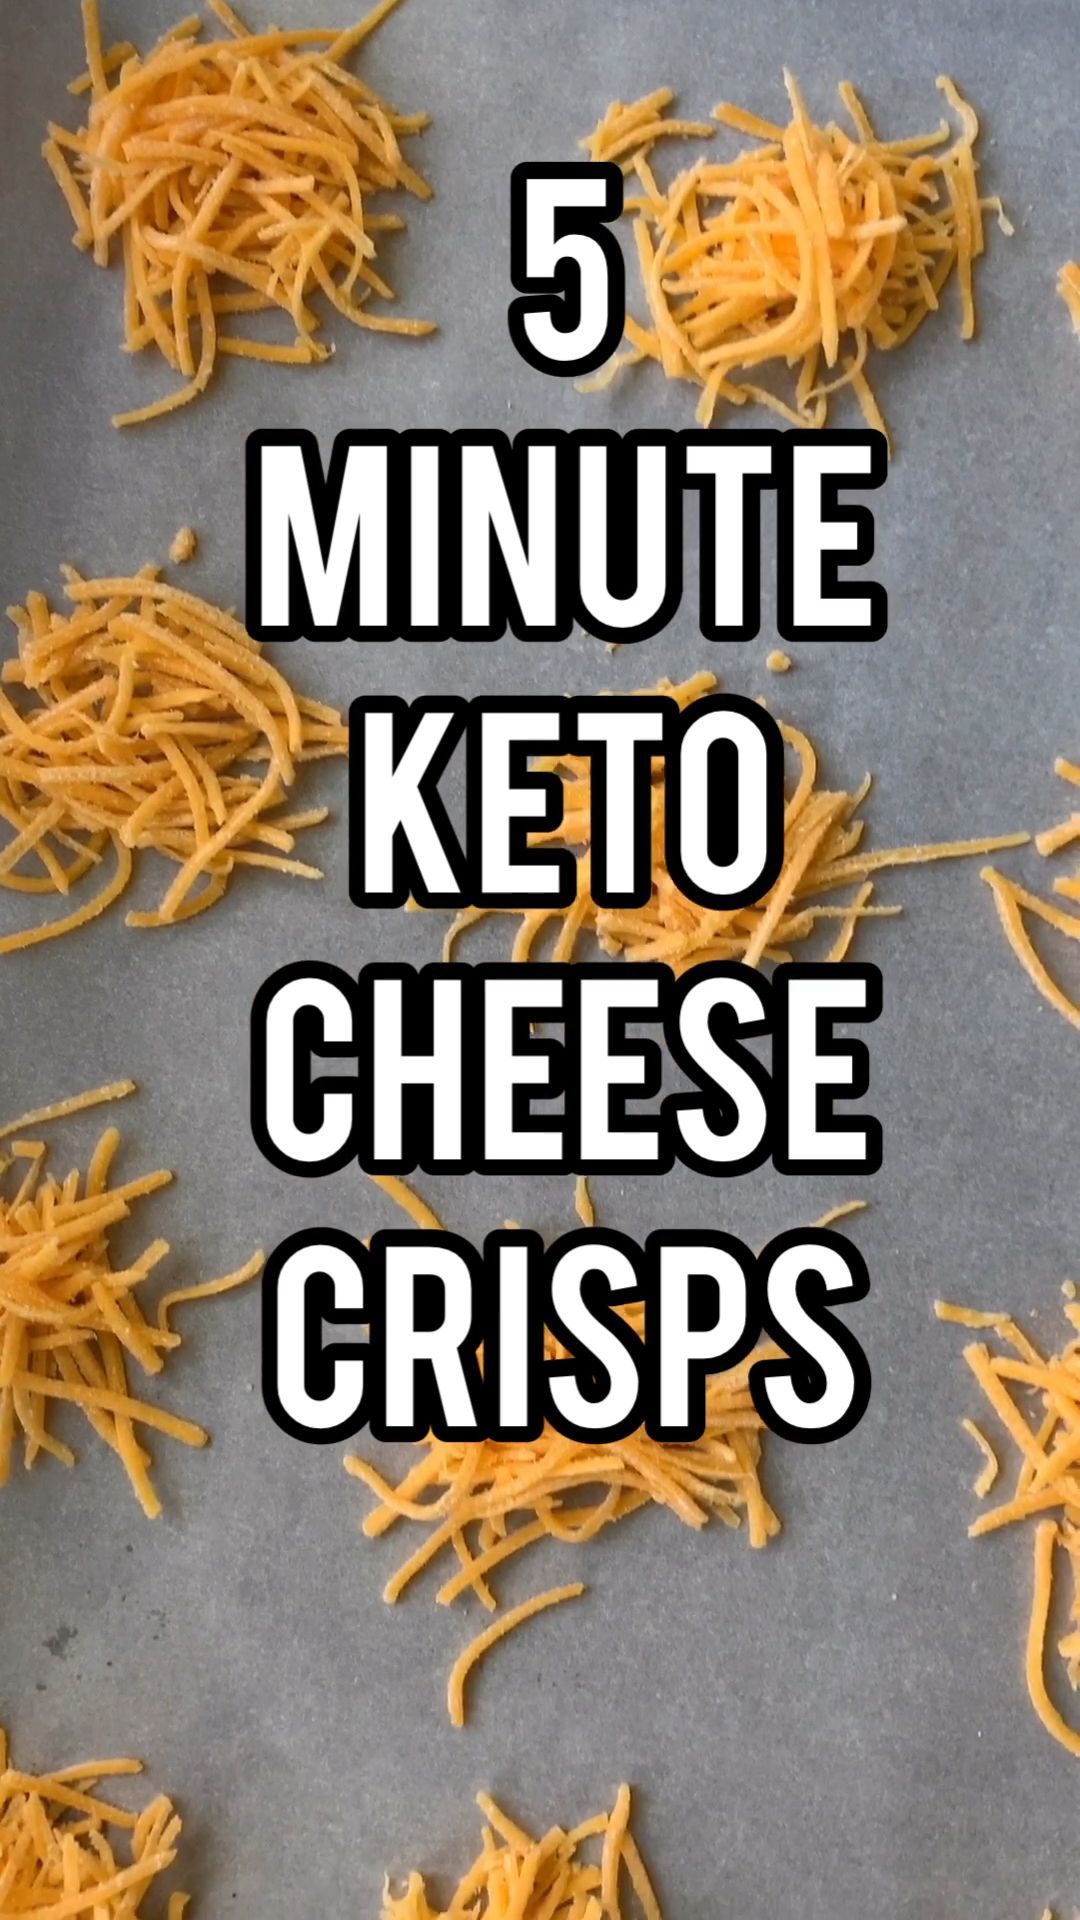 Keto Cheese Crisps in 5 Minutes | Salty Side Dish -   18 healthy recipes Snacks salty ideas